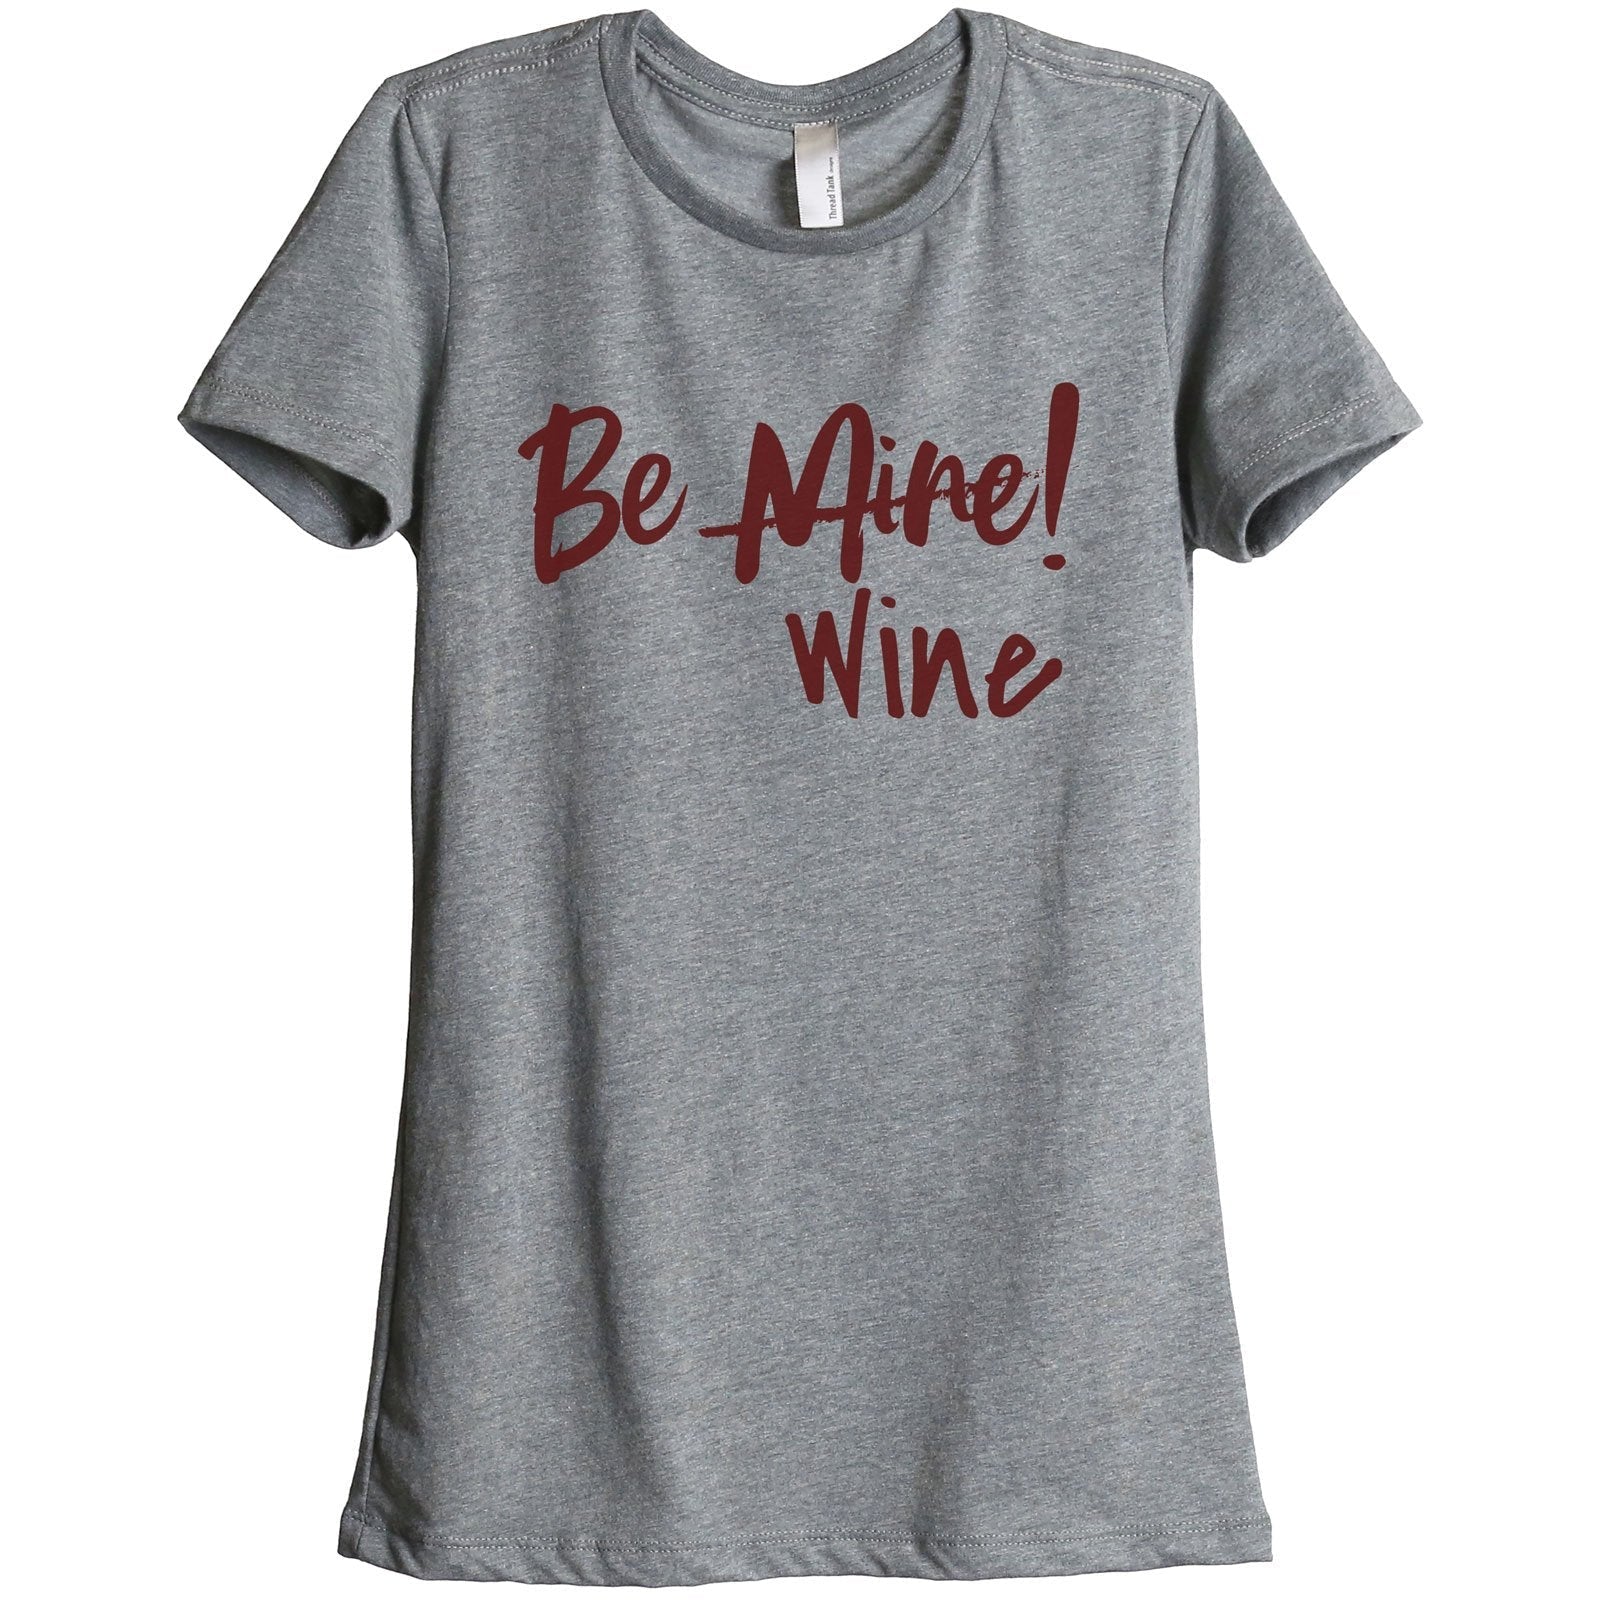 Be Mine Wine - Stories You Can Wear